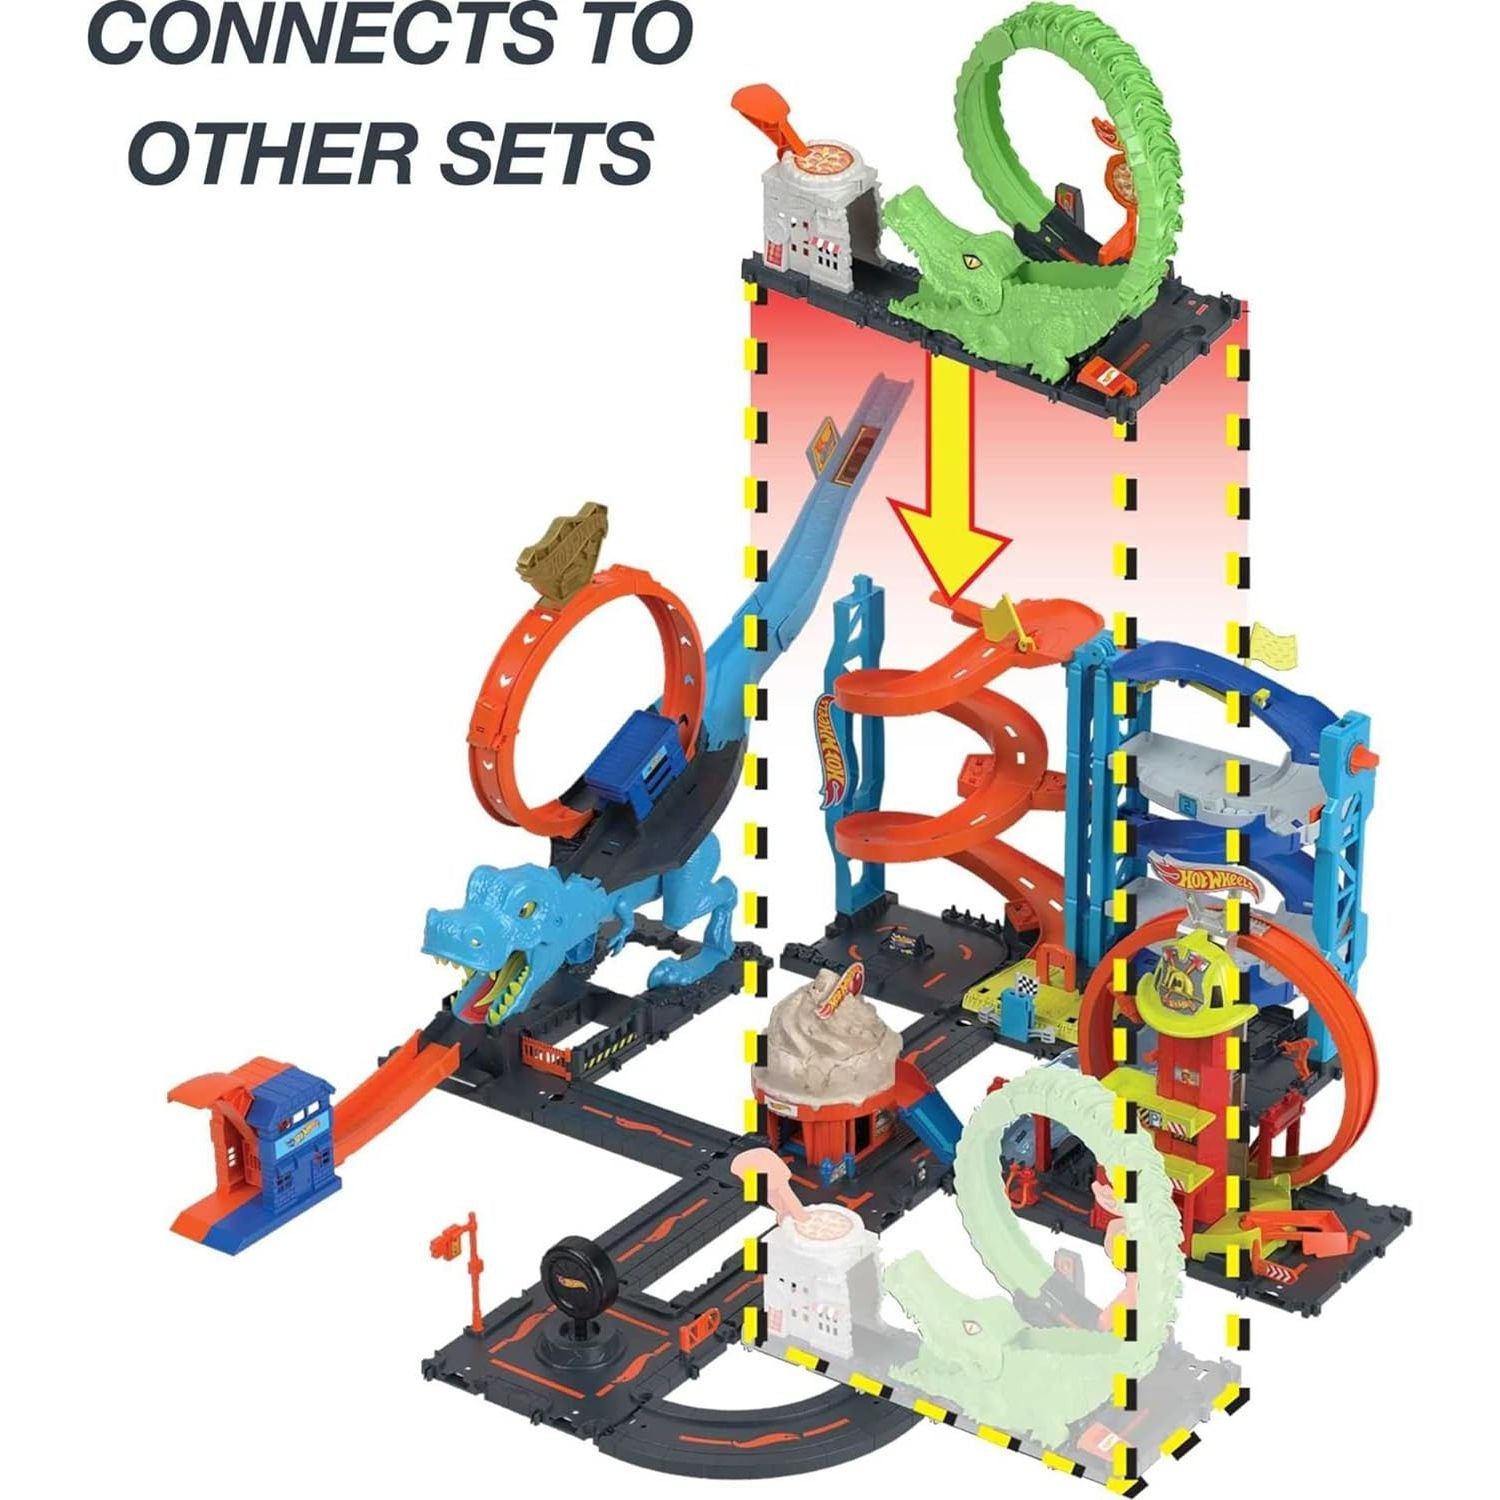 Hot Wheels Toy Car Track Set Gator Loop Attack Playset in Pizza Place with 1;64 Scale Car, Connects to Other Sets